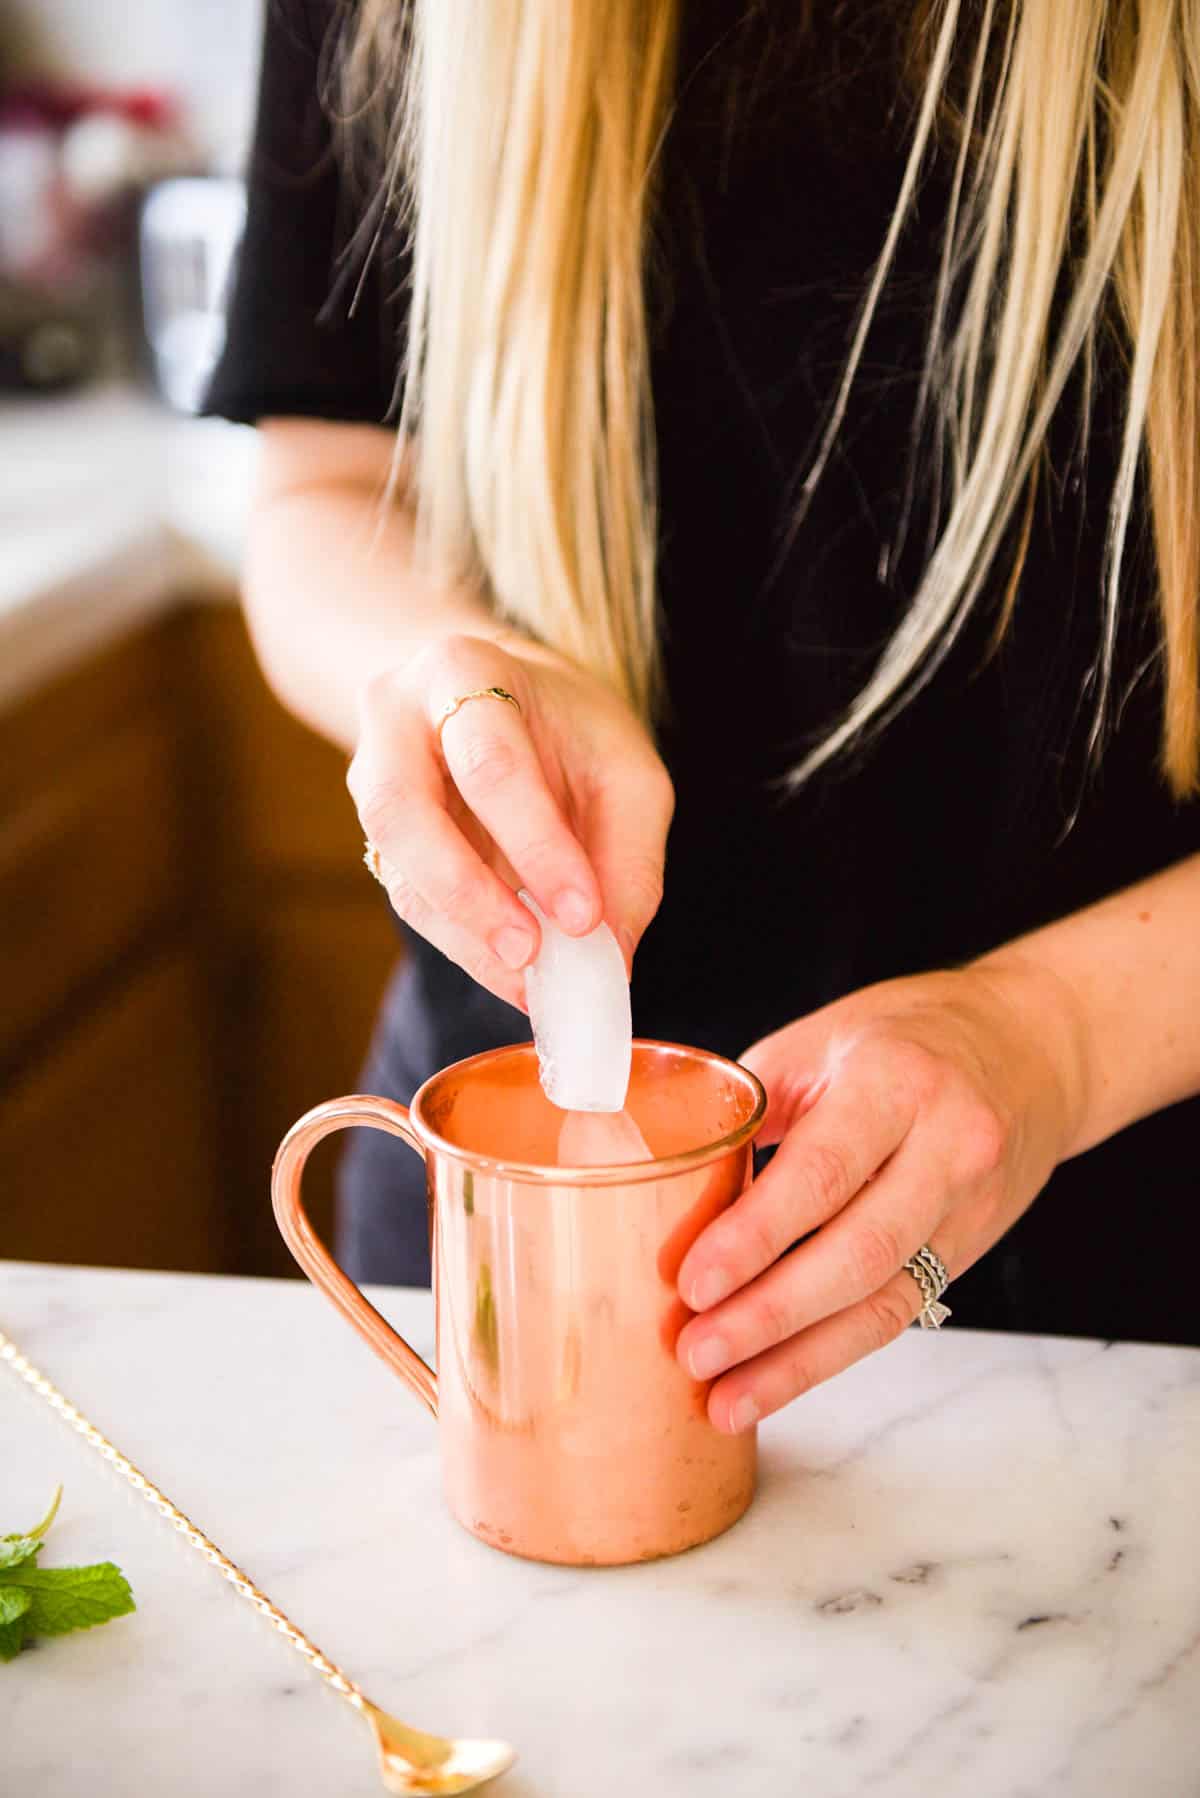 Woman adding ice to a copper mug on a counter.